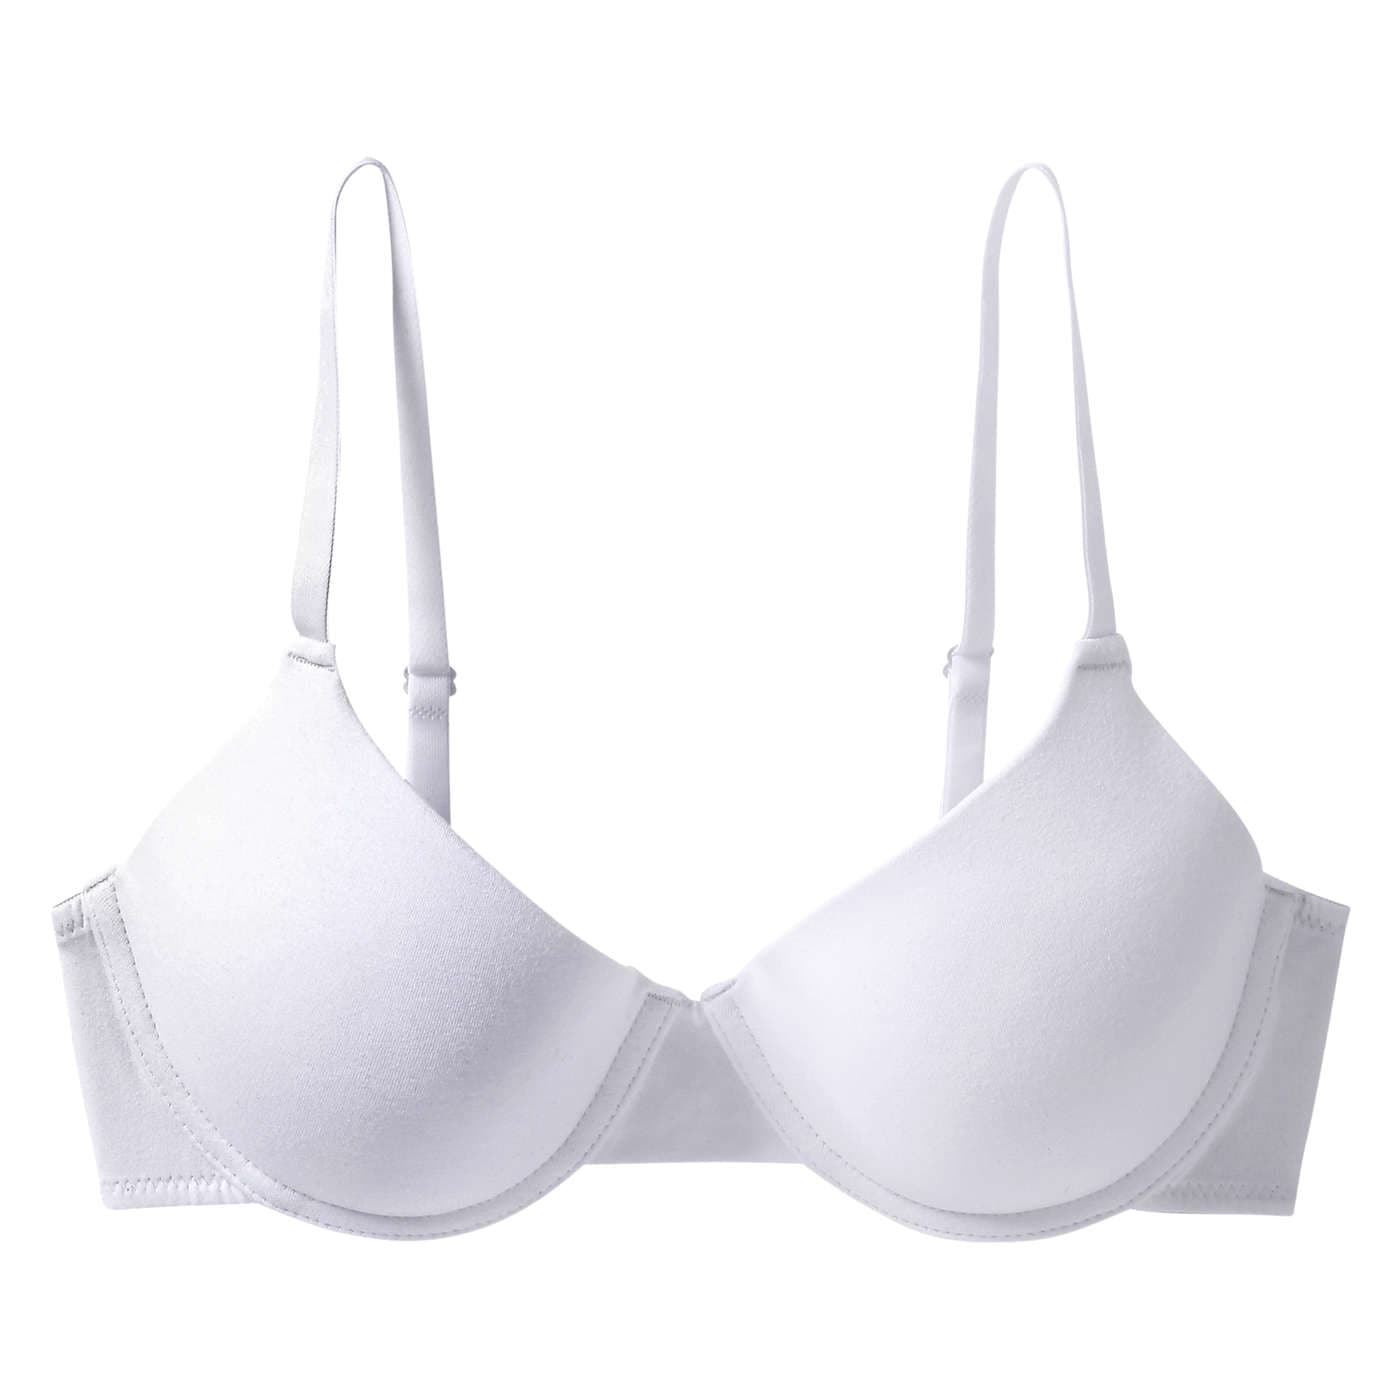 Buy online Blue Cotton Tshirt Bra from lingerie for Women by Penny